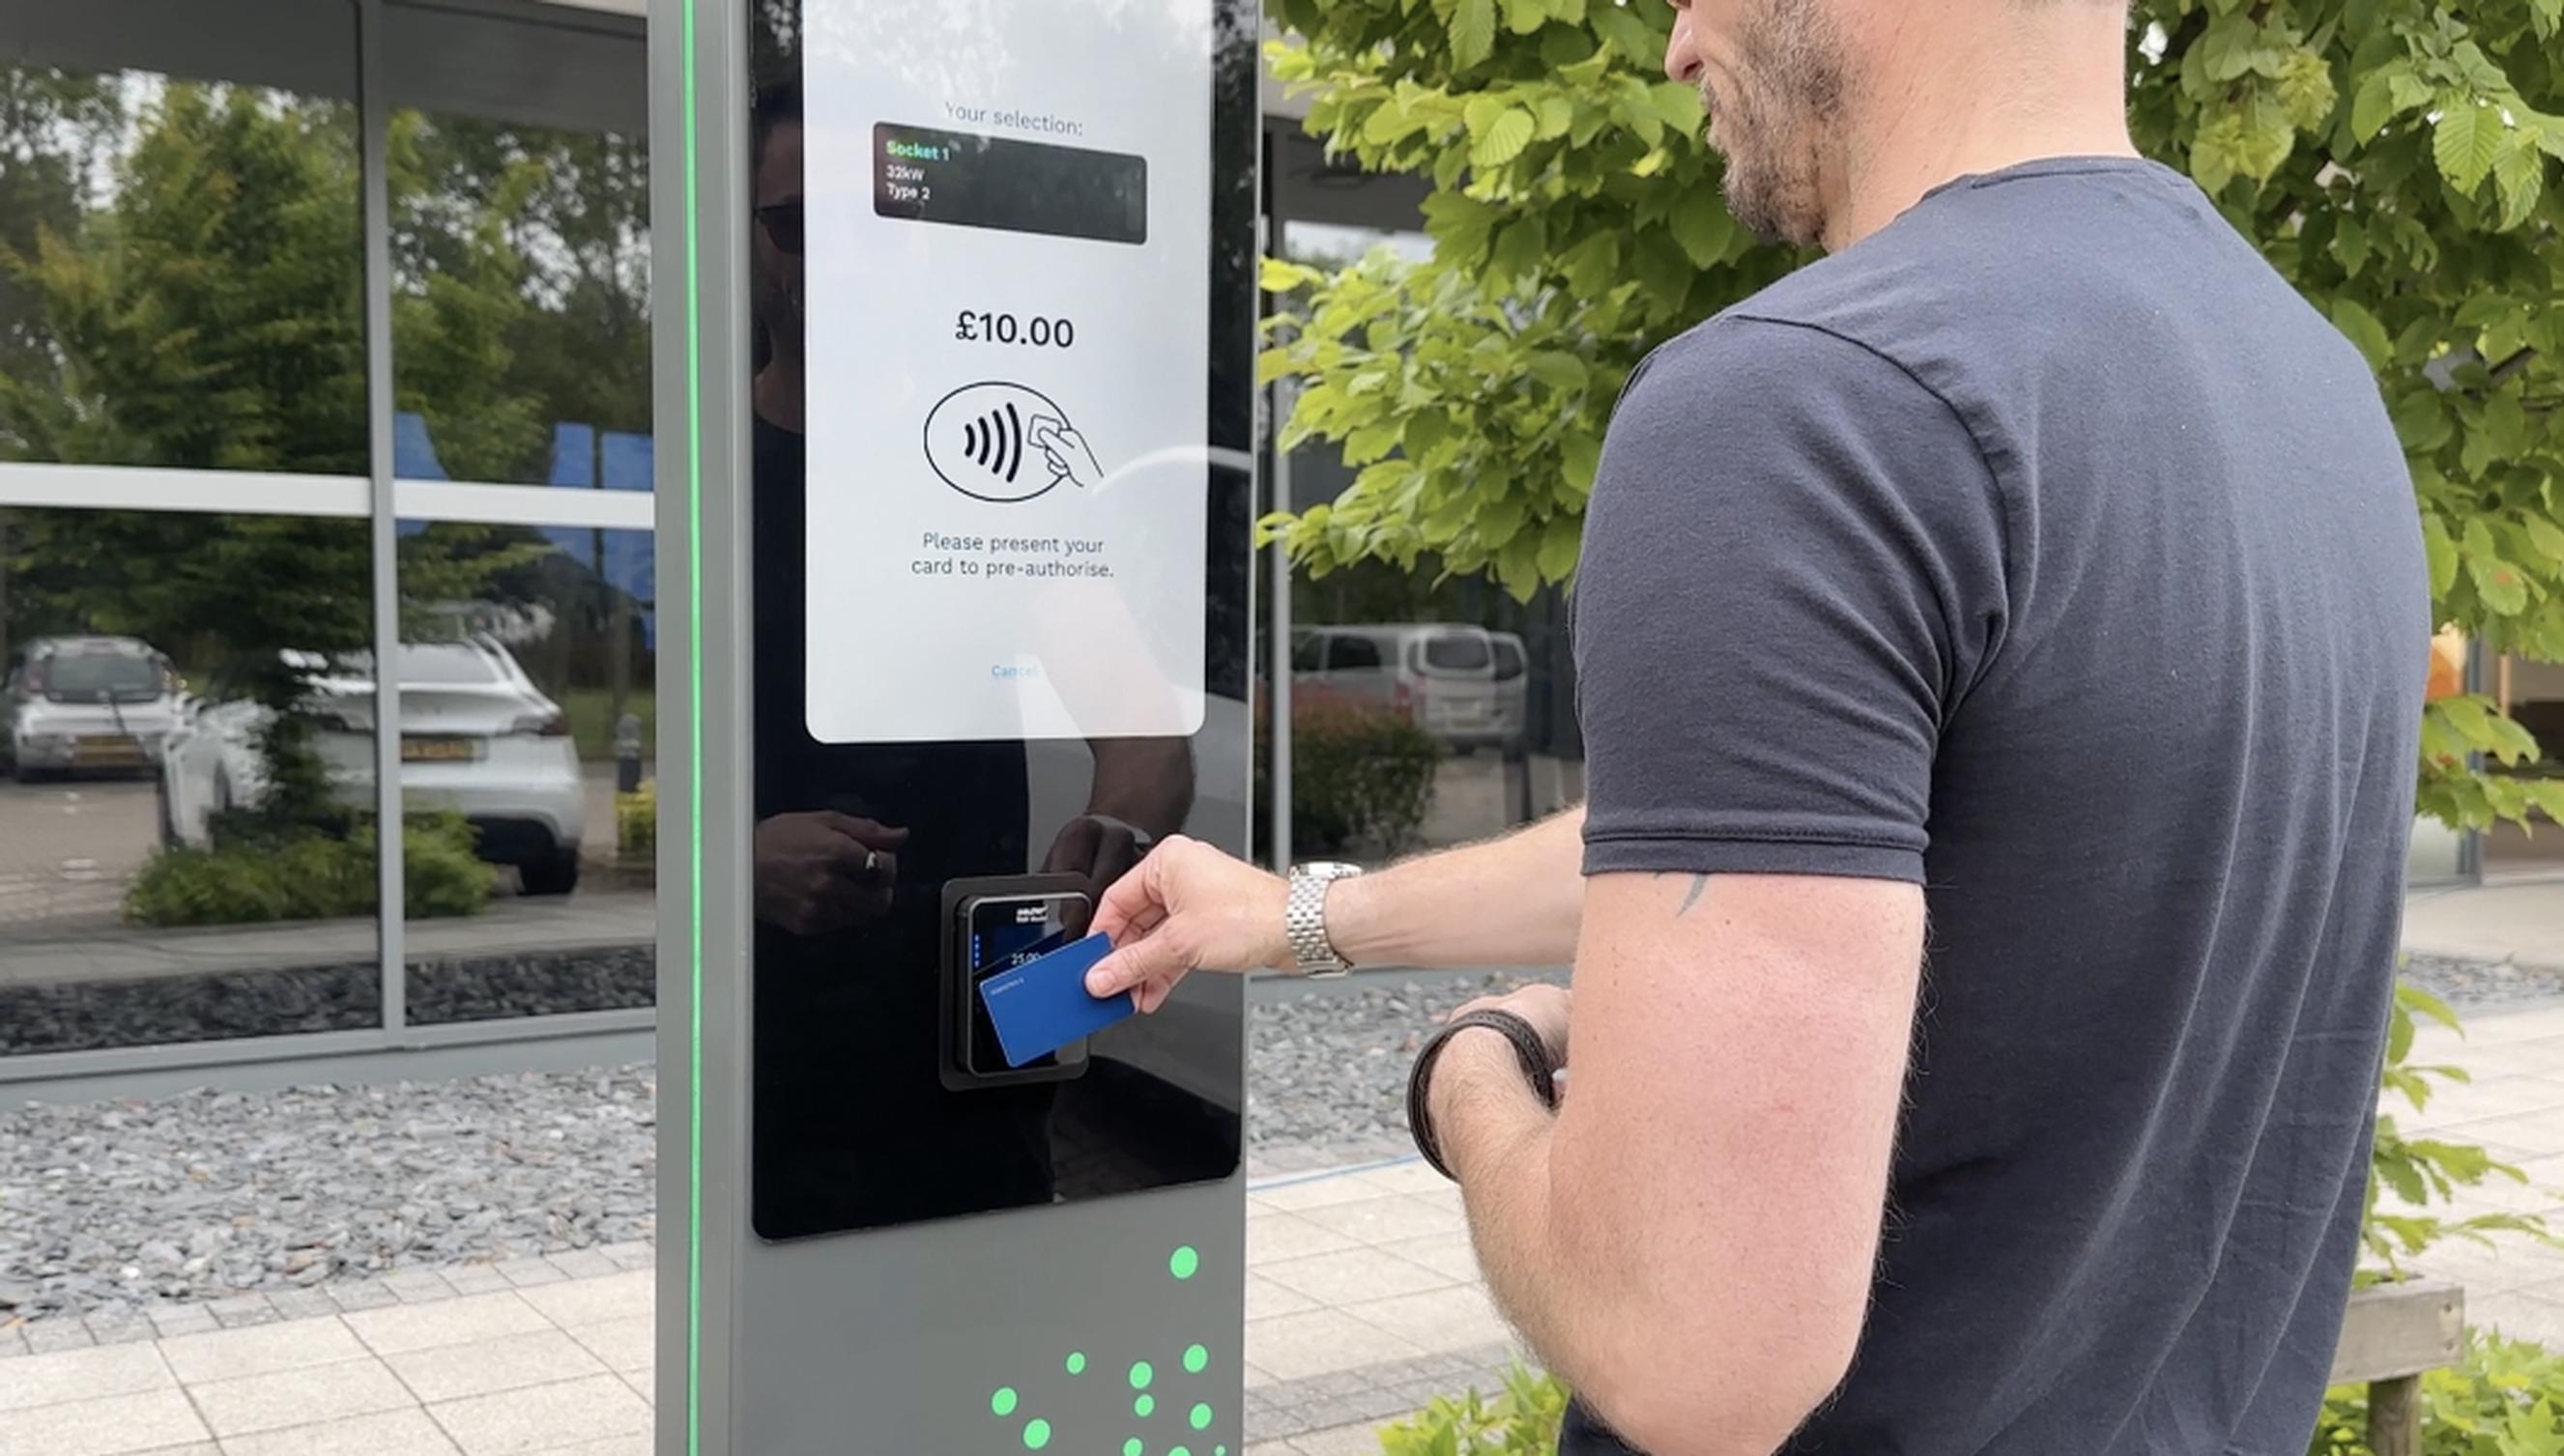 Paythru is developing an integrated approach to parking and EV payment